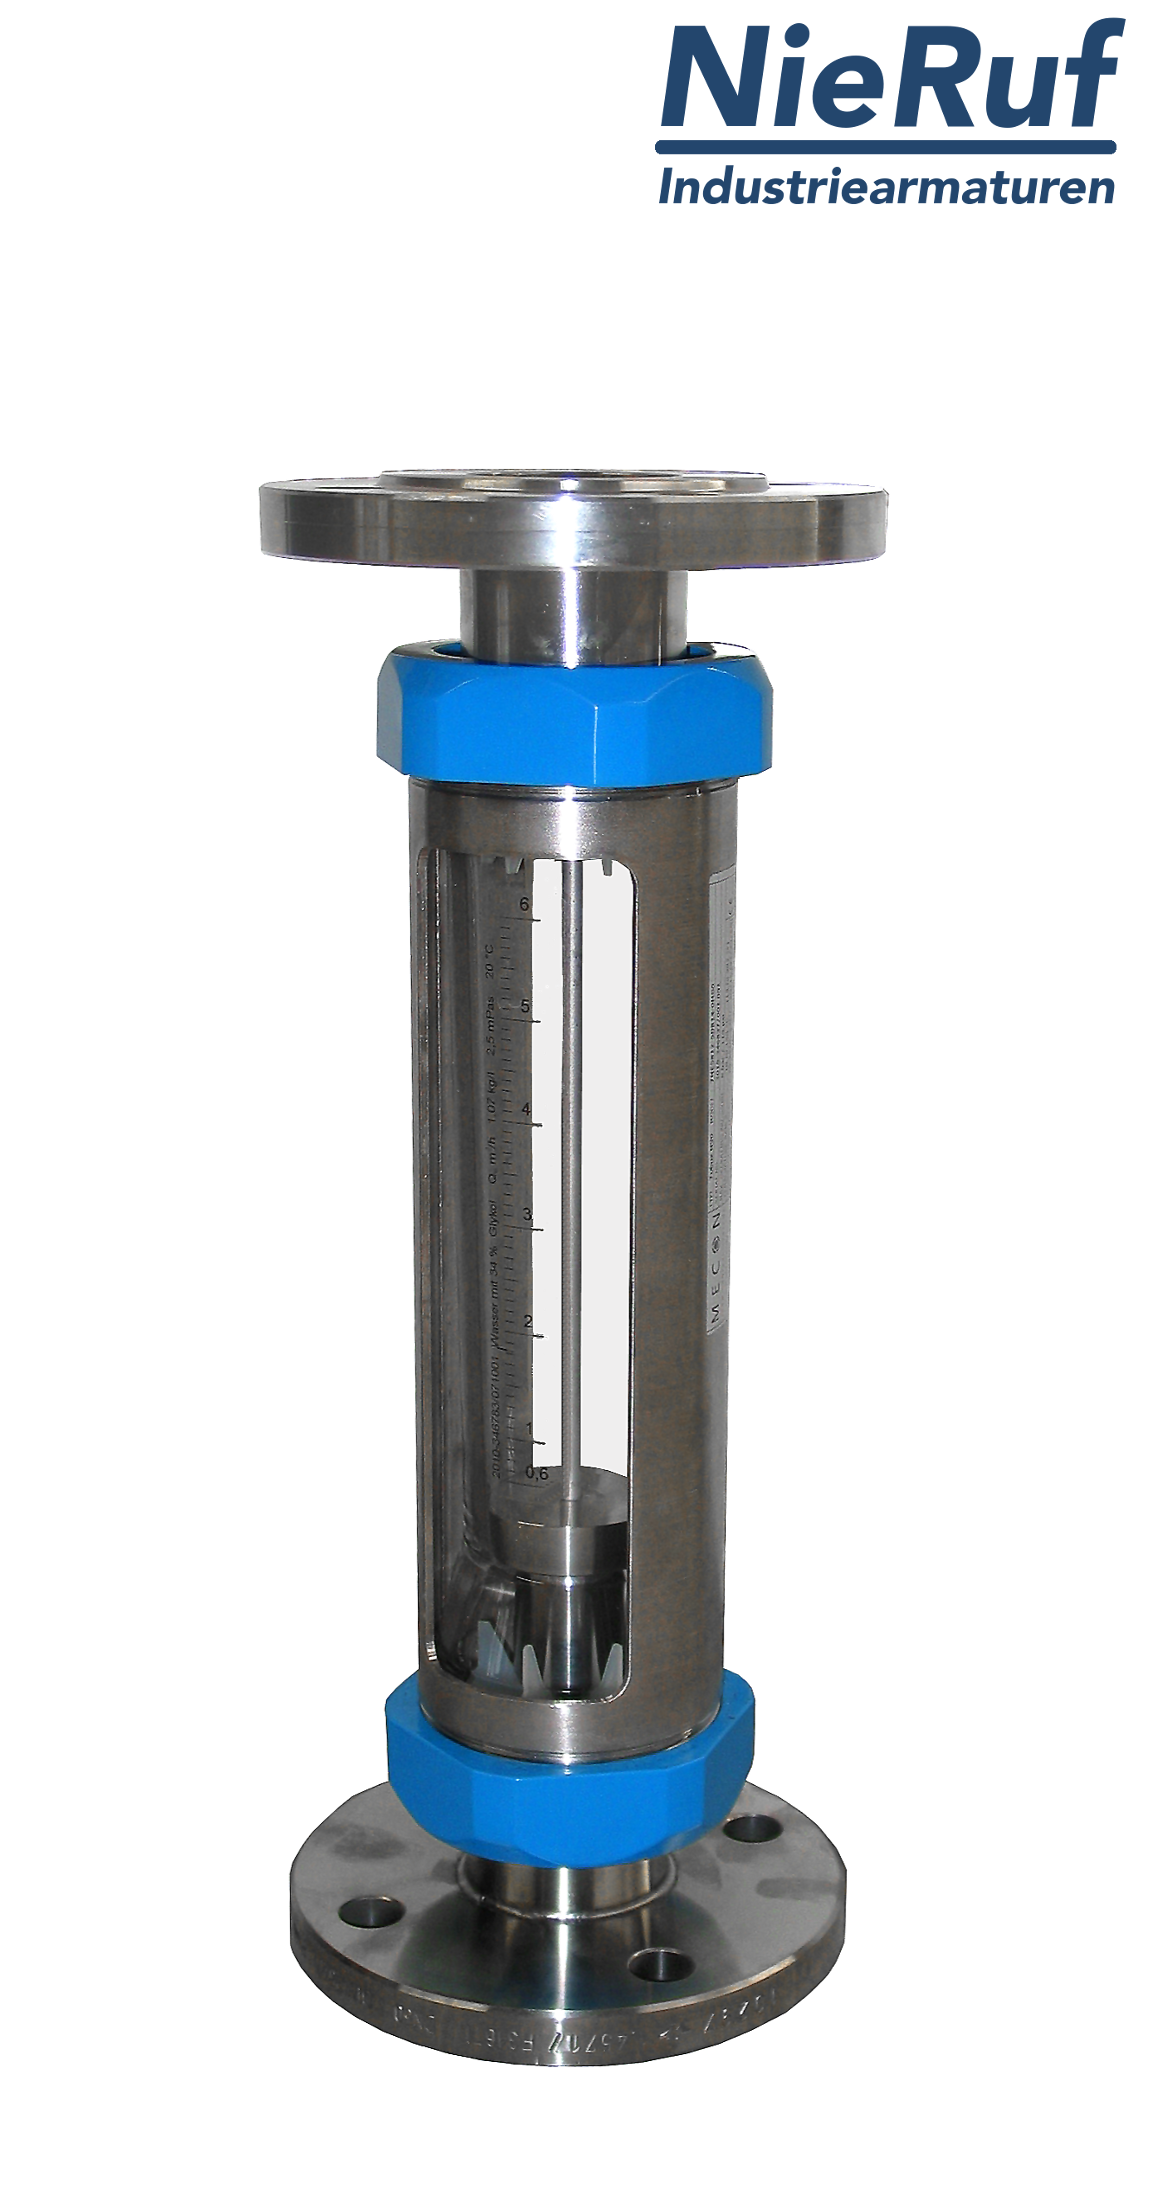 Variable area flowmeter stainless steel + borosilicate flange DN25 6.5 - 65.0 l/h water FKM